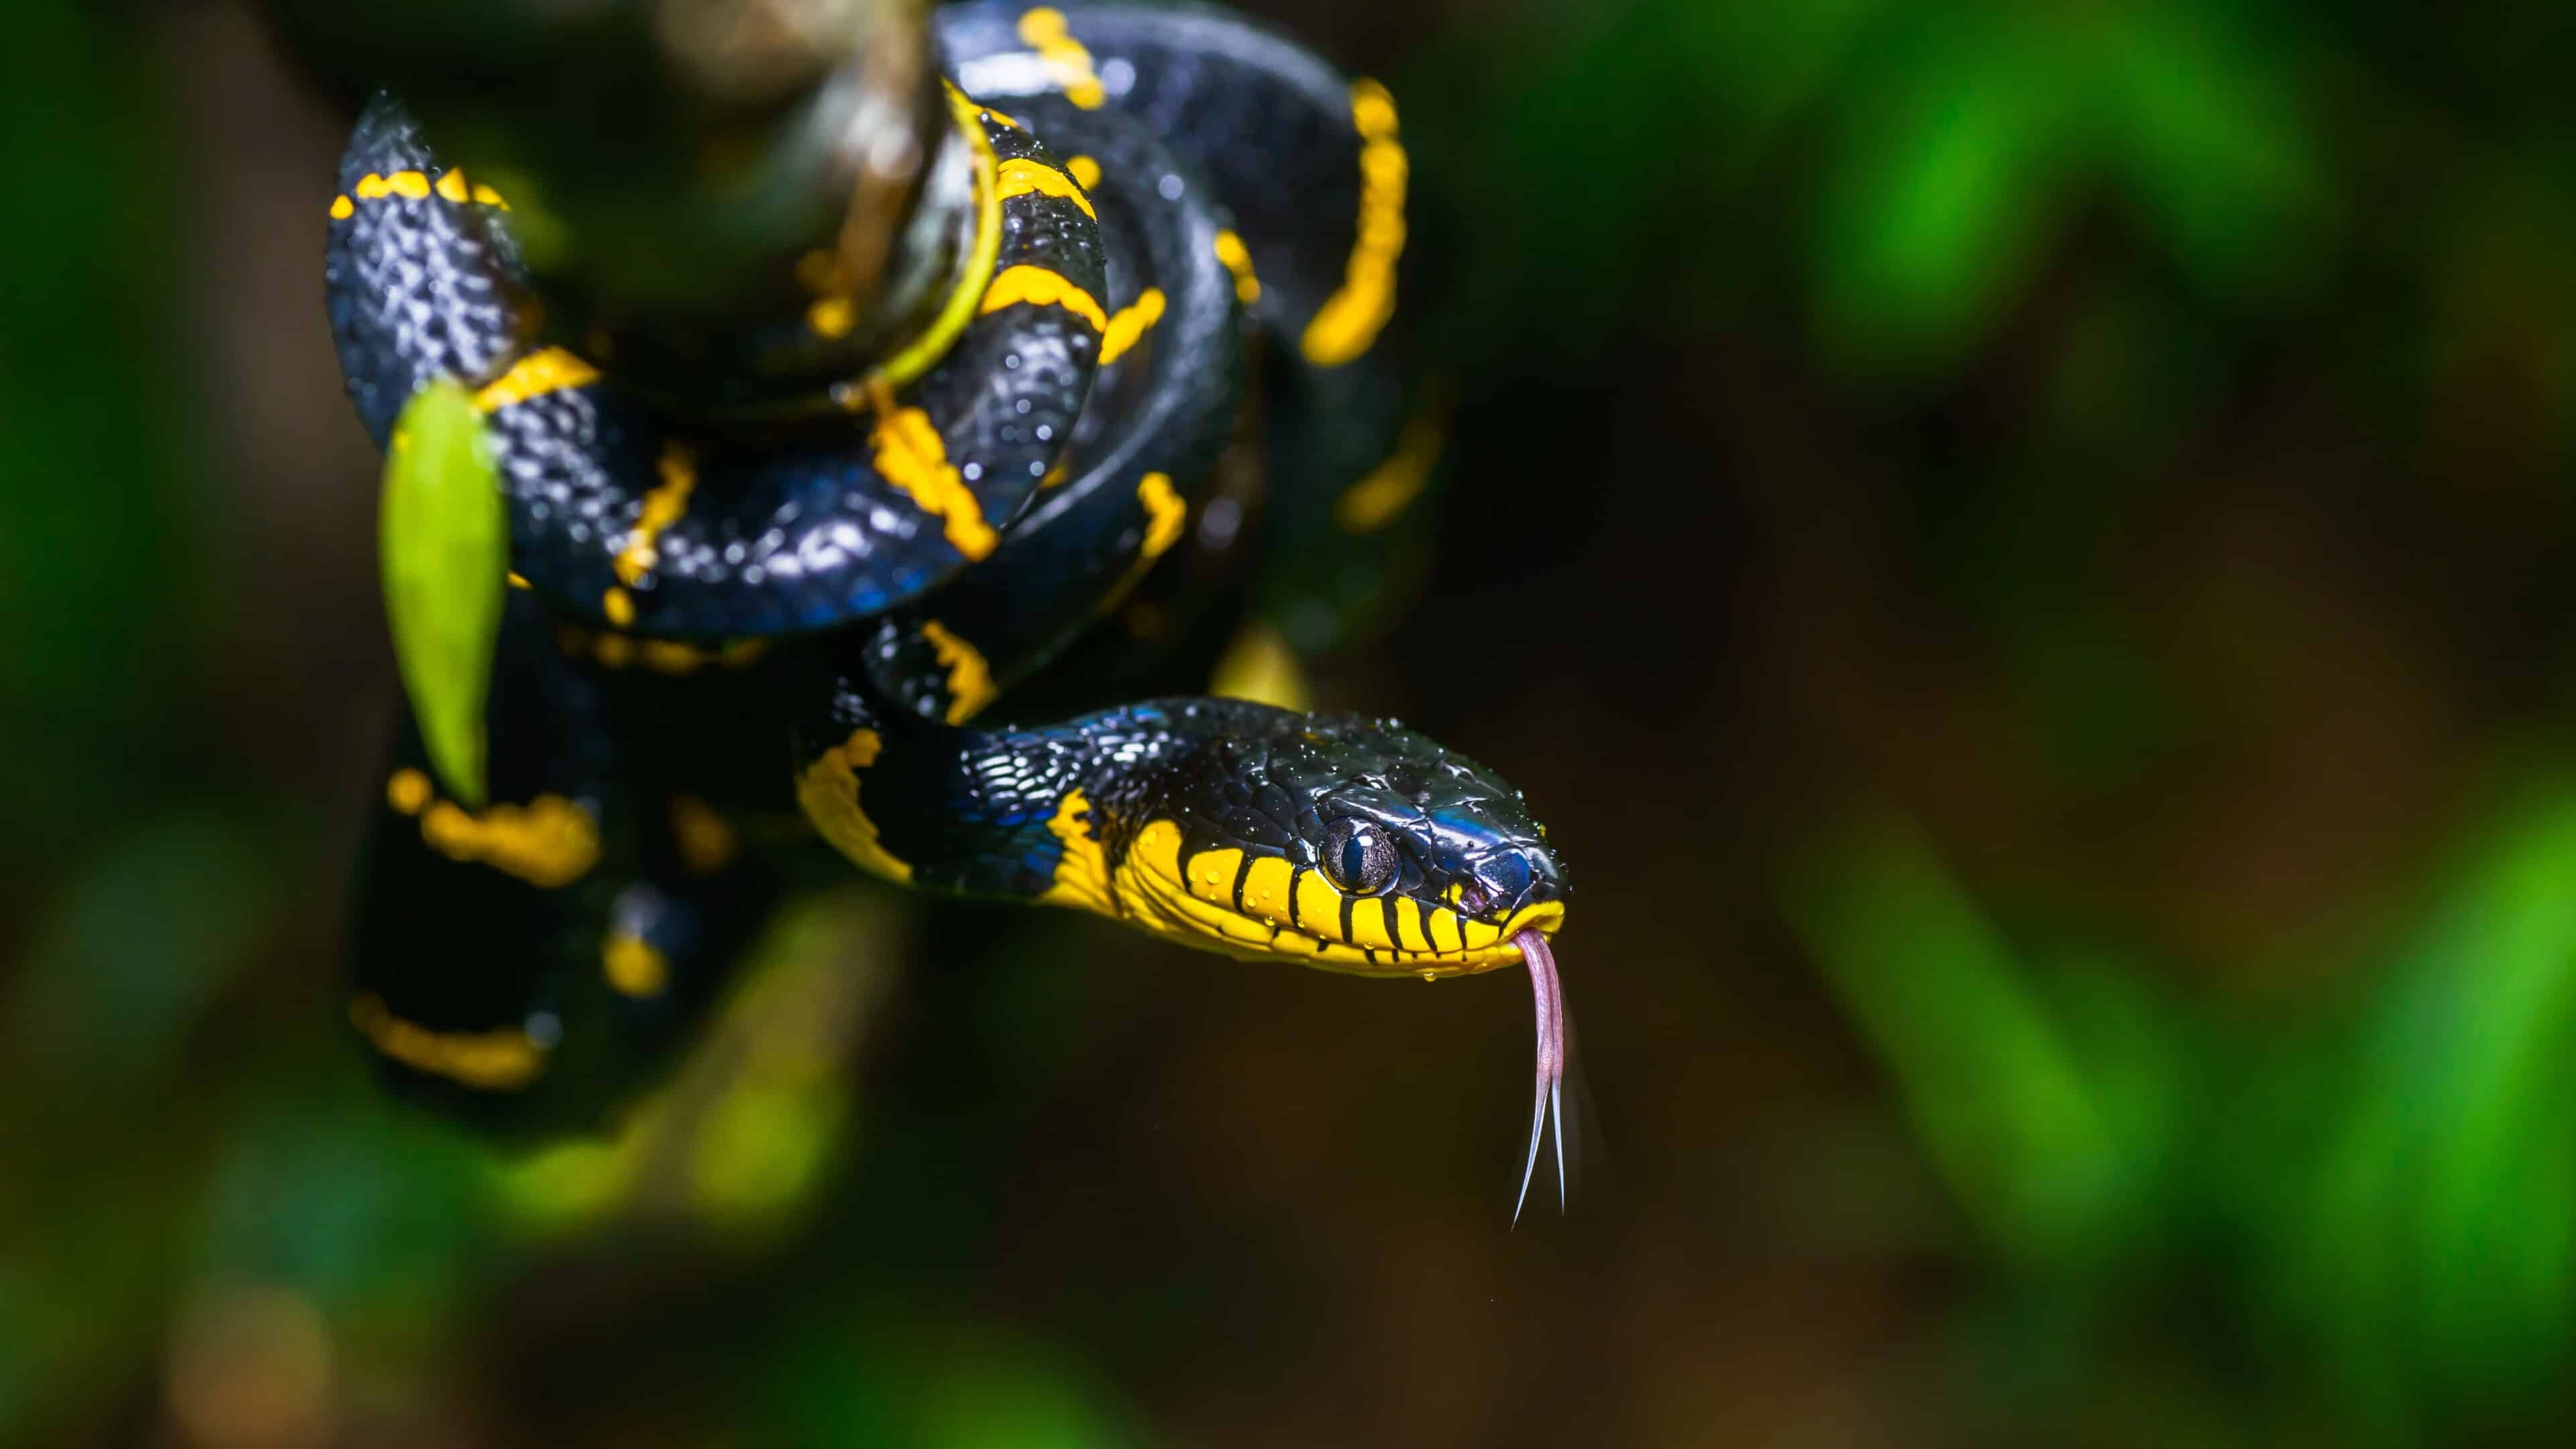 Snake: Mangrove snake has fangs in the back of its mouth, with the fangs curled backwards. 3840x2160 4K Wallpaper.